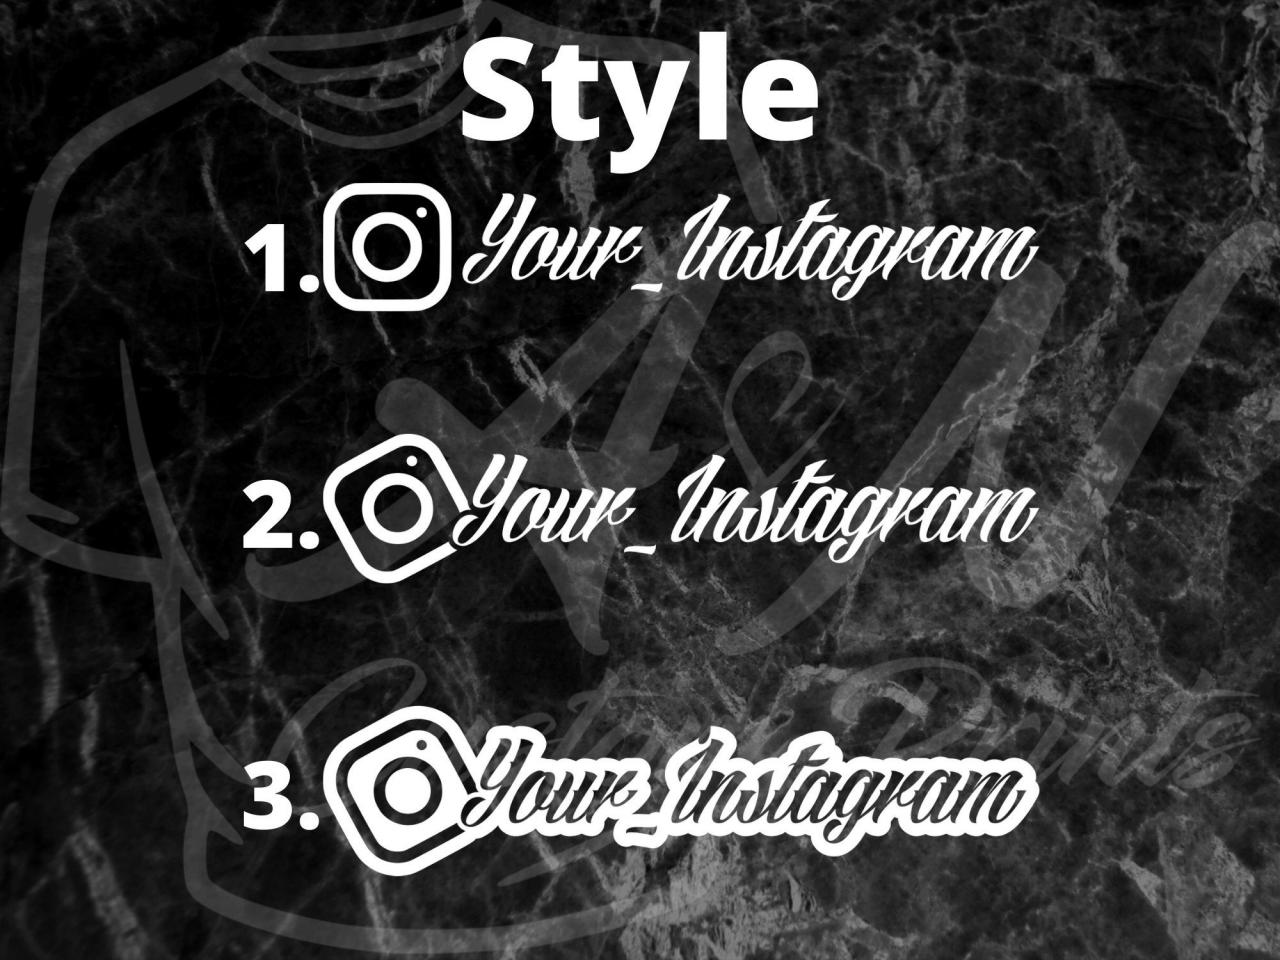 Custom Instagram Car Vinyl Decal, IG Decal, Window Decal, Personalized, Custom Stickers, Name Decal, Instagram Business